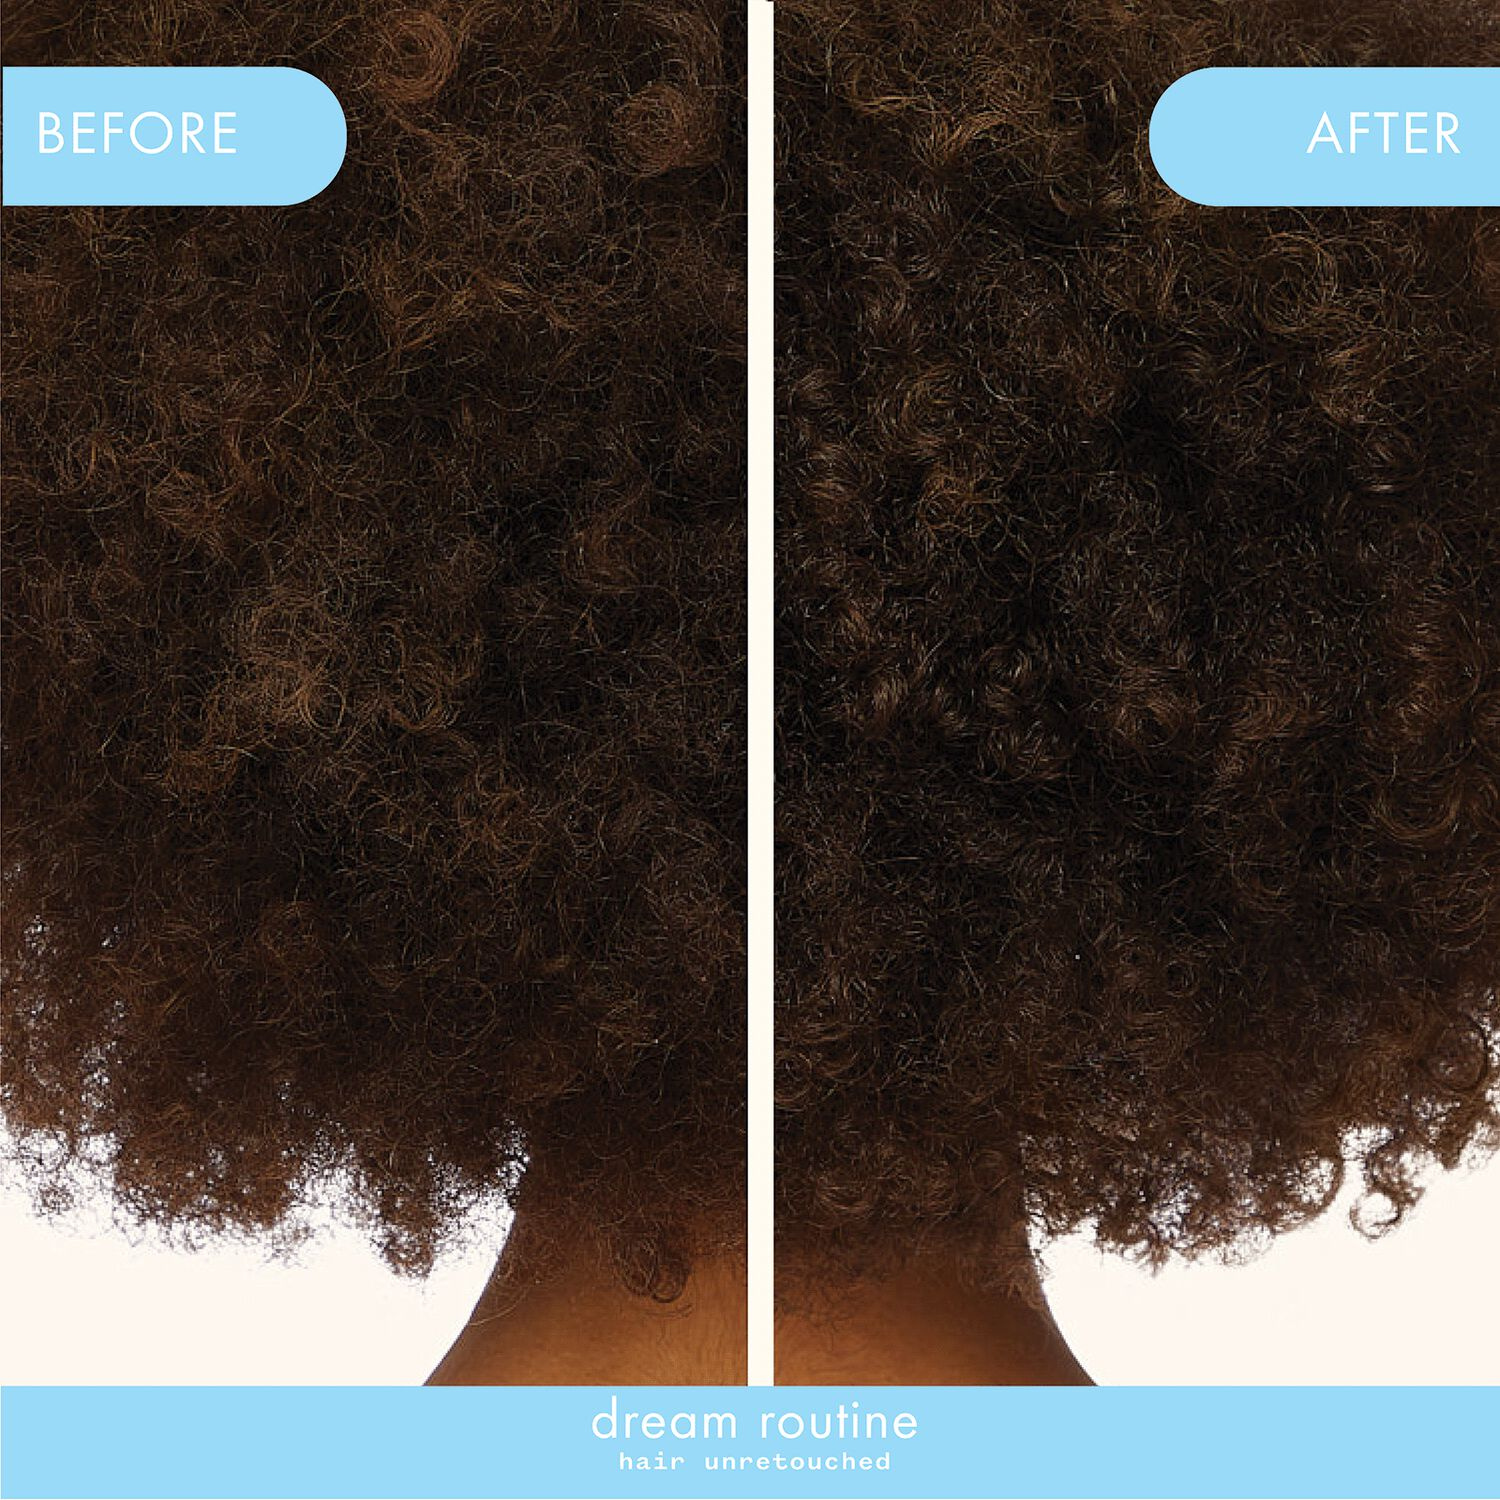 hydro rush intense moisture shampoo: this shampoo gently cleanses, boosts moisture for 72 hours*, and leaves hair that's 3x more hydrated*. hydro rush intense moisture conditioner: this conditioner boosts moisture for 72 hours*, and leaves hair that's 3x more hydrated*.